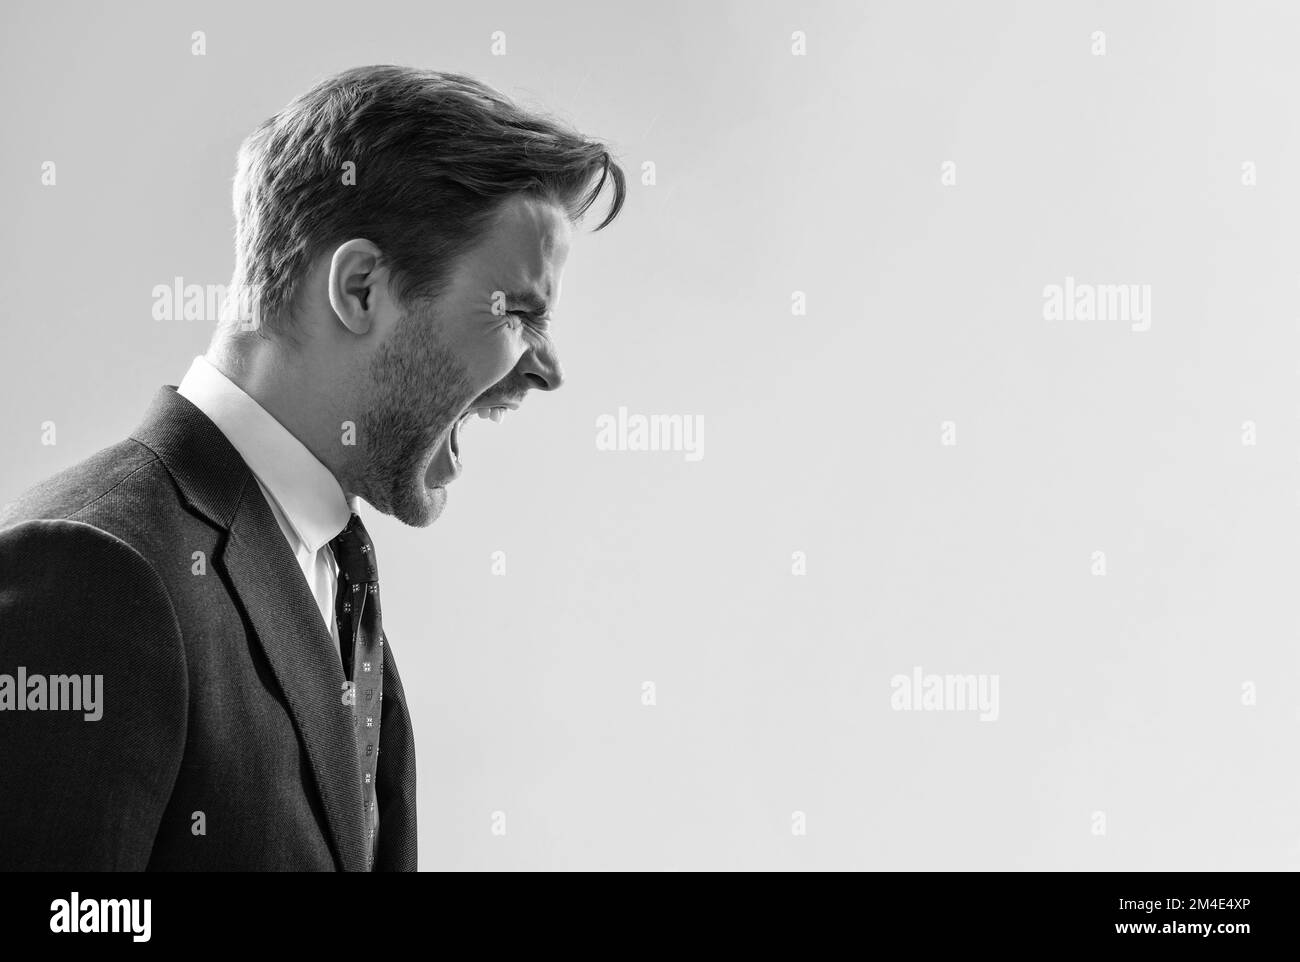 Yelling and screaming. Angry man yell grey background. Manager scream in anger. Yelling guy profile Stock Photo